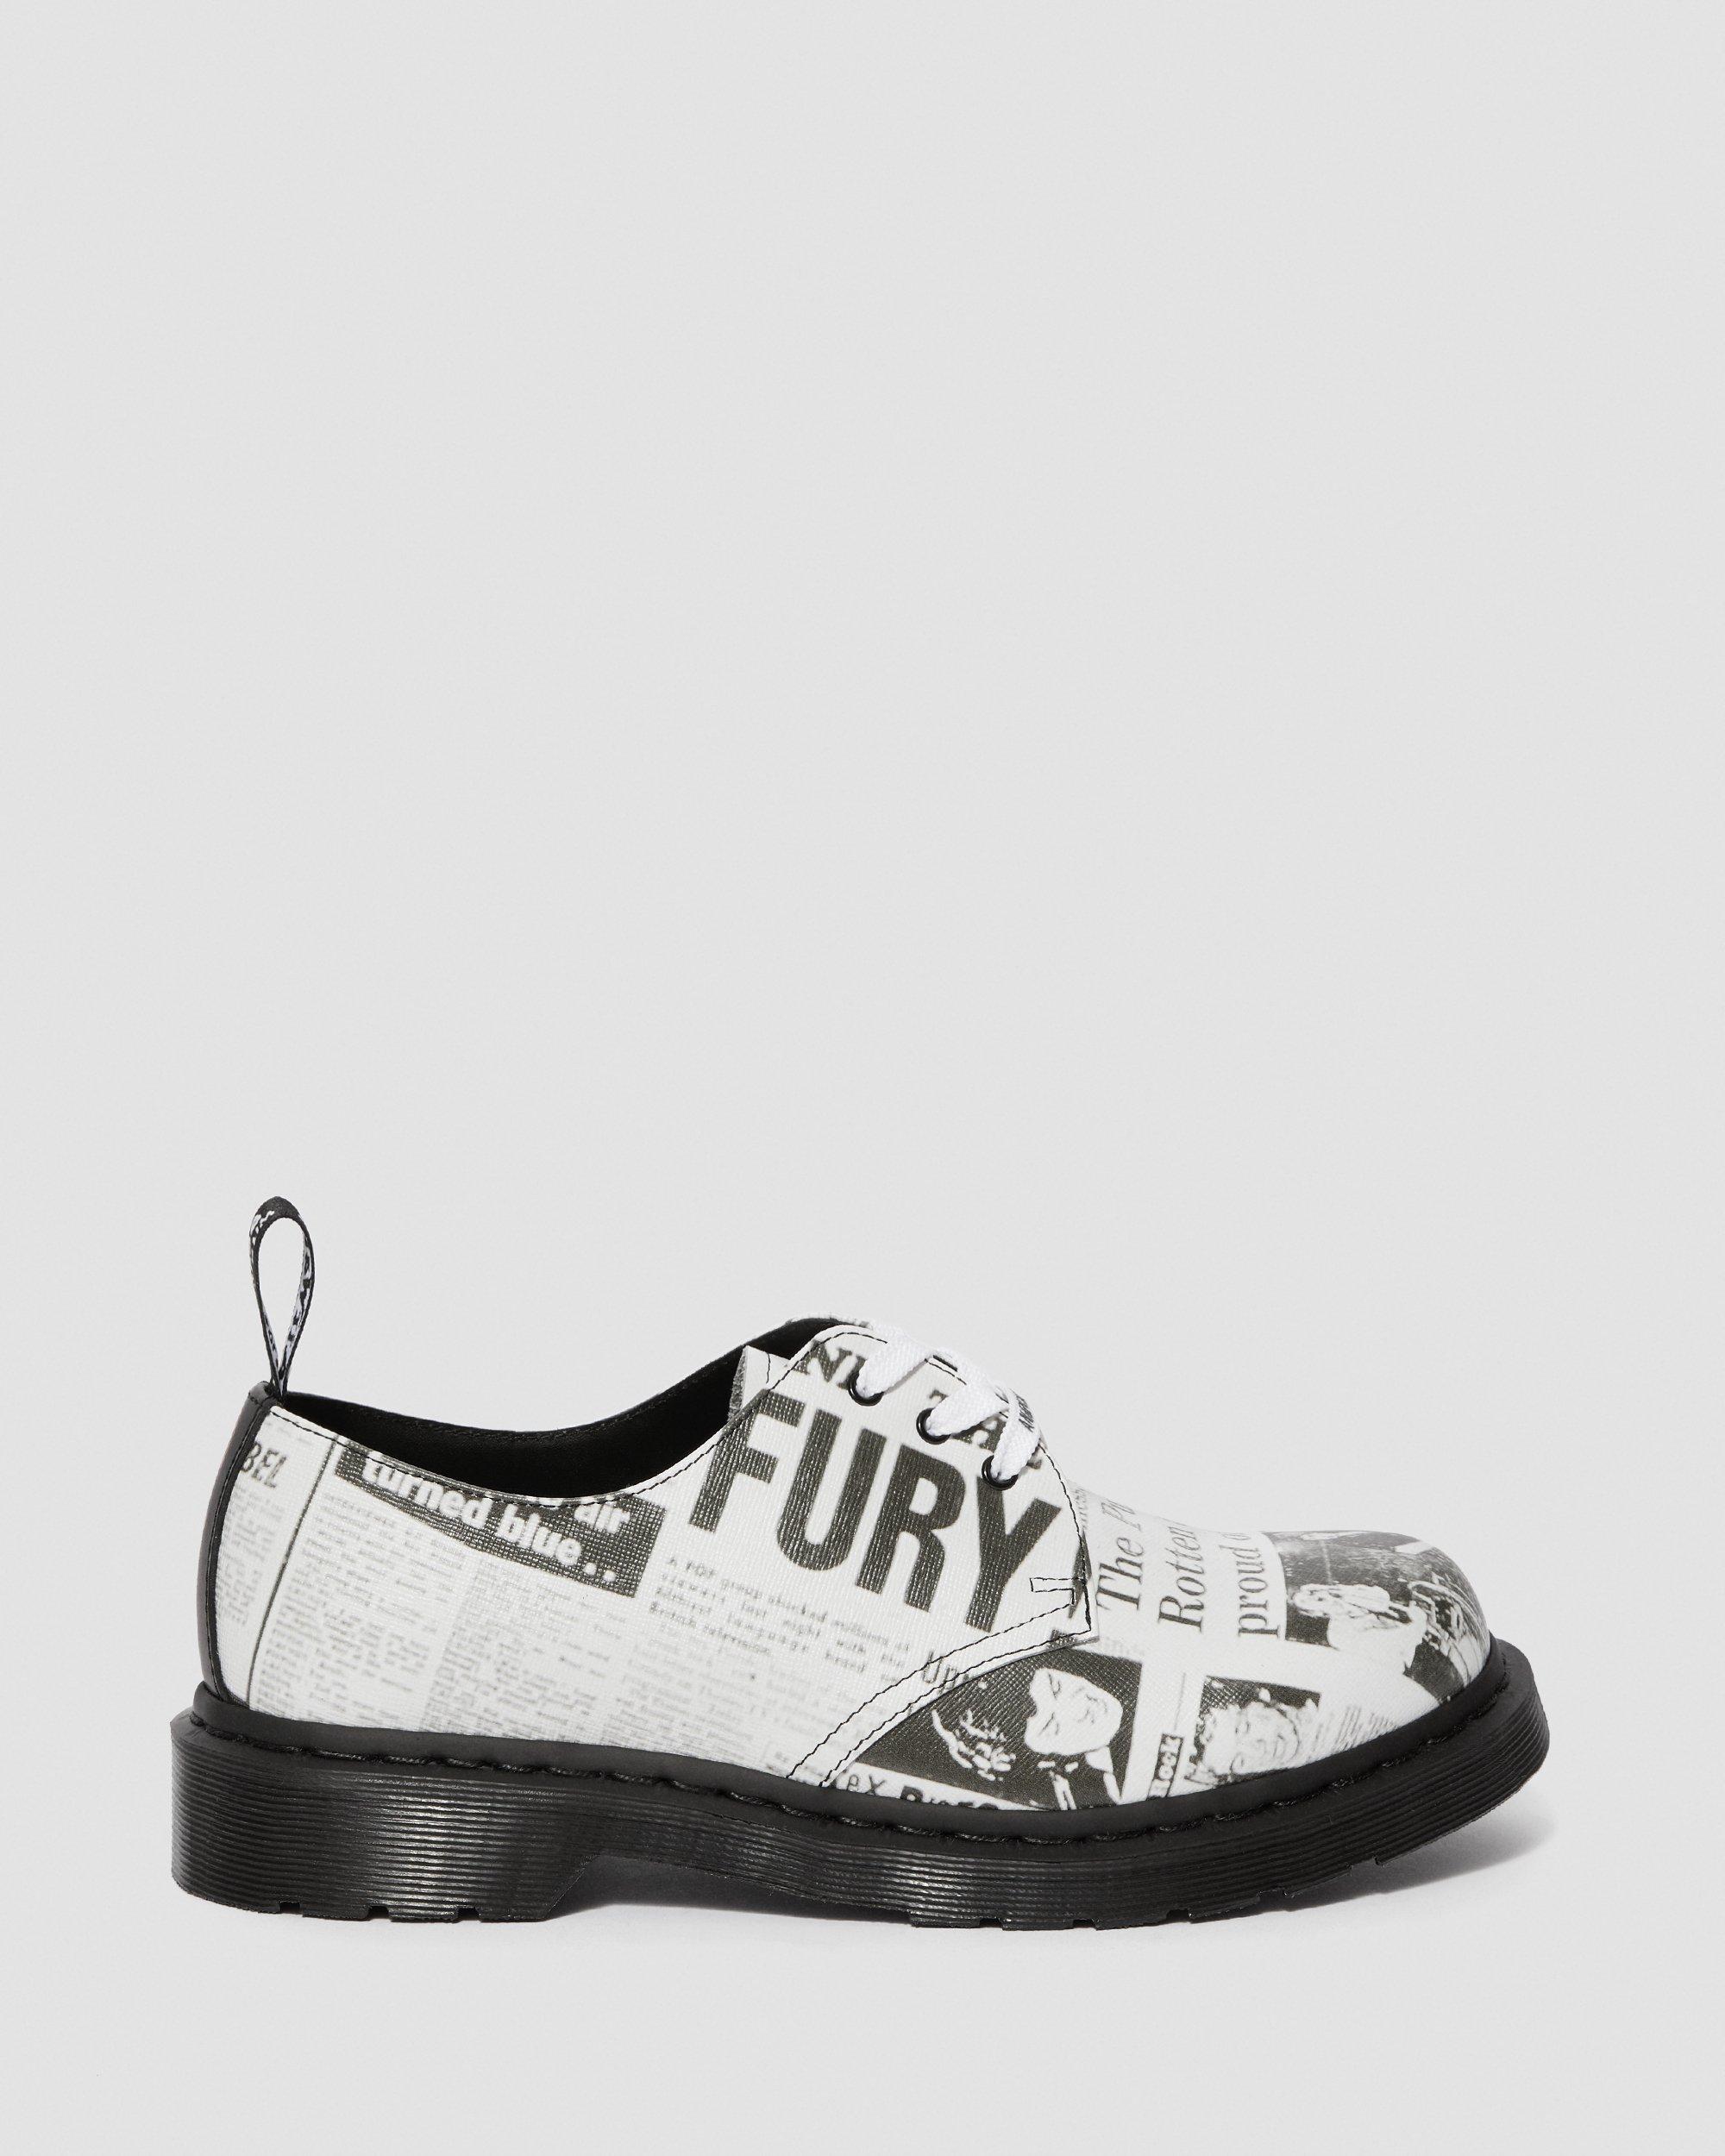 Sex Pistols Leather Printed Oxford Shoes Dr. Martens